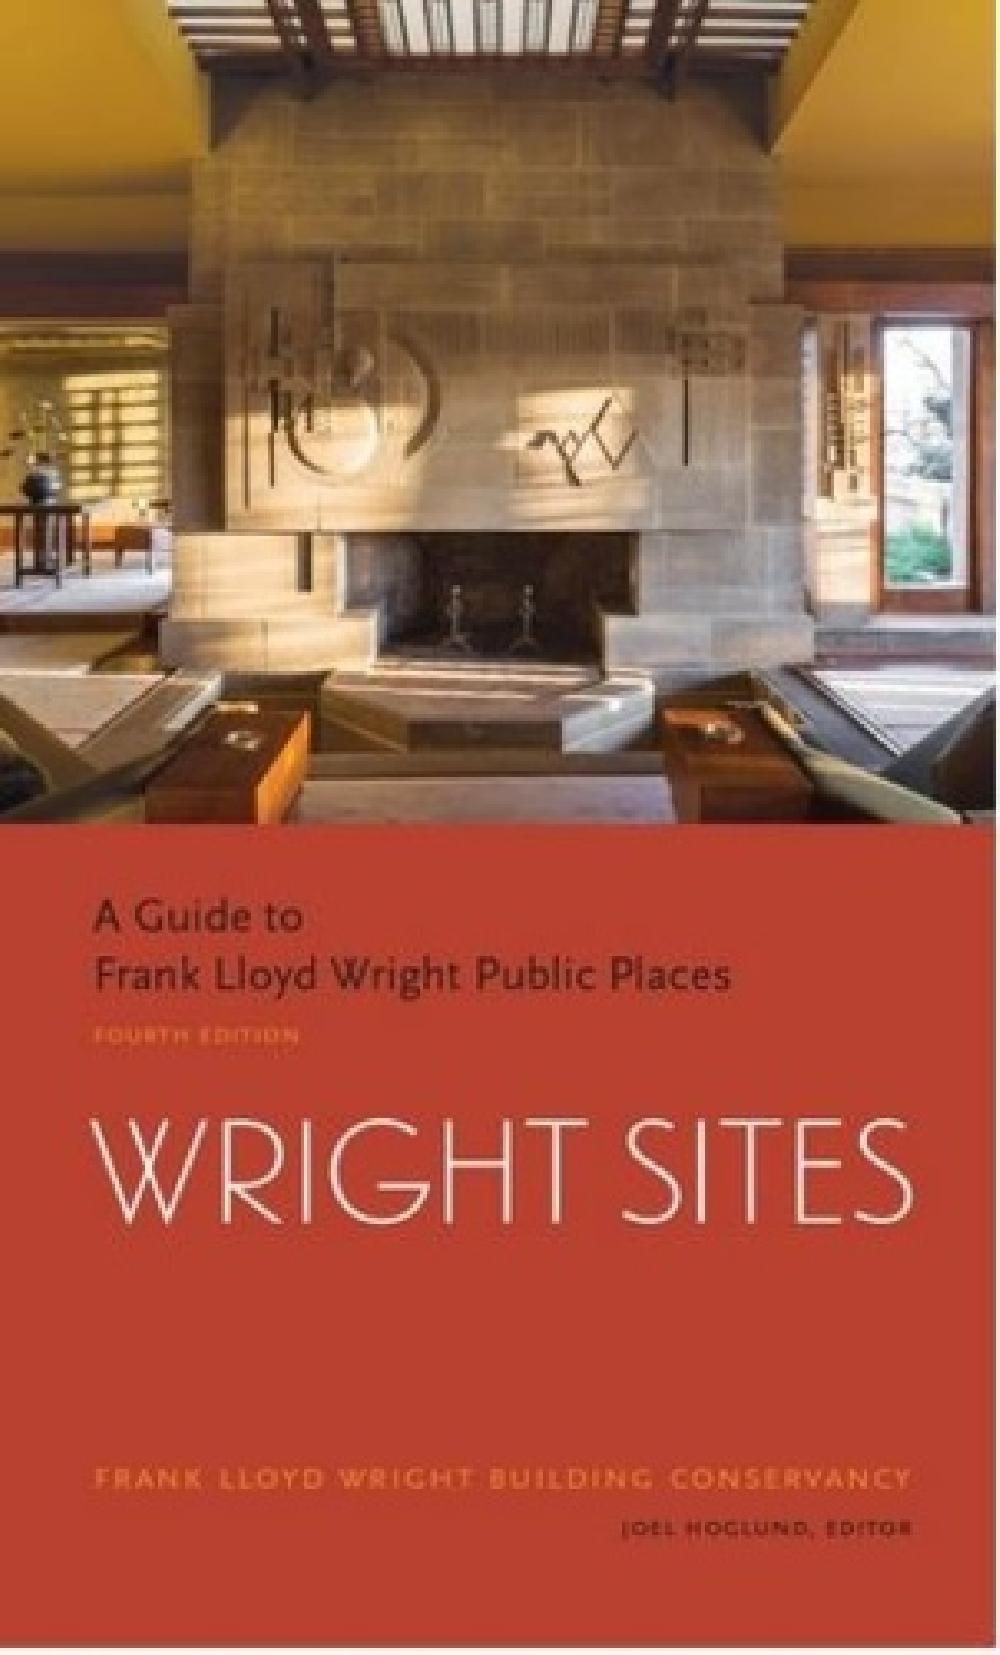 Wright sites - A Guide to Frank Lloyd Wright Public Places 